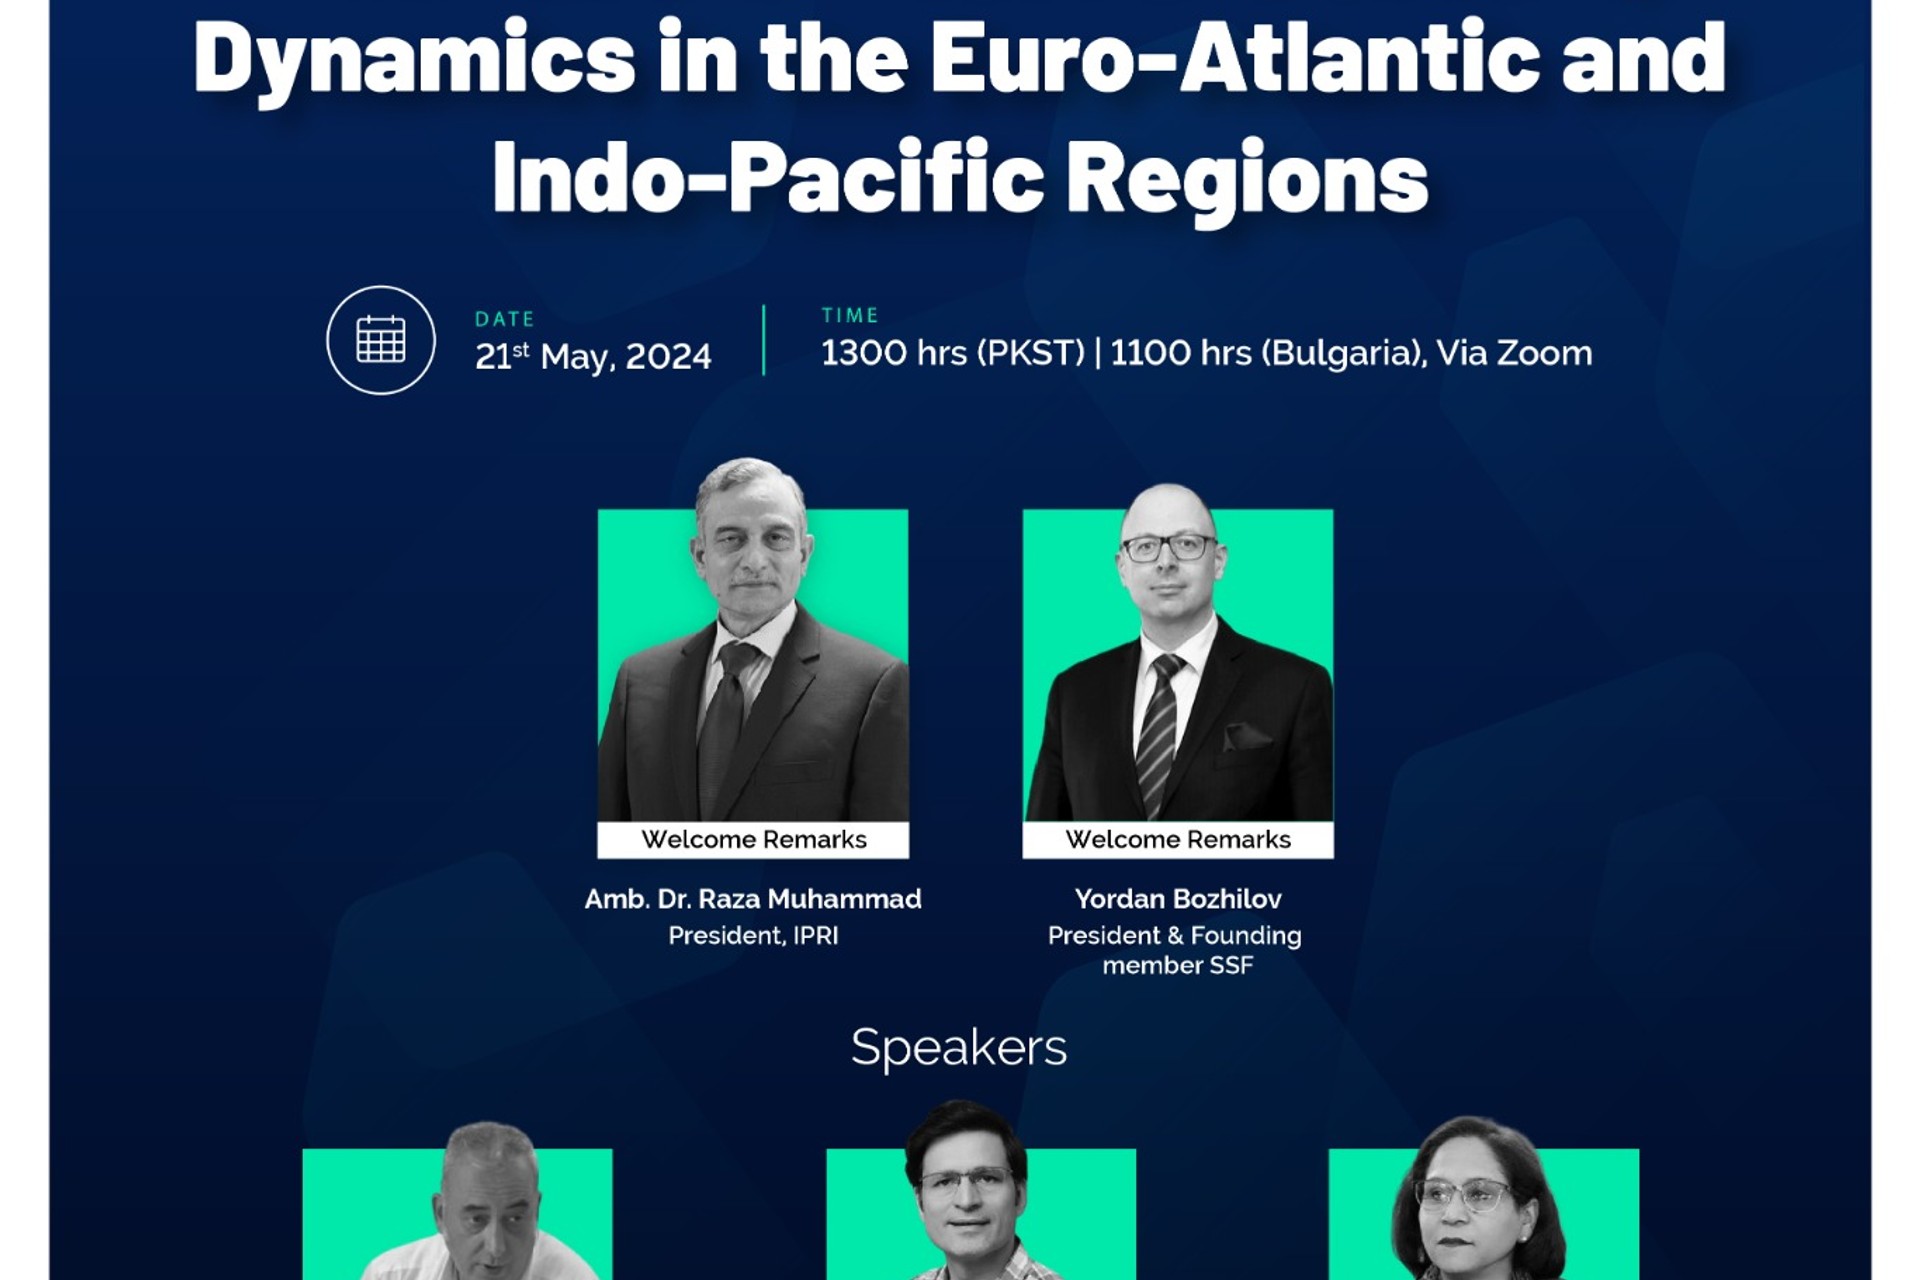 INTERNATIONAL PEACE AND SECURITY: DYNAMICS IN THE EURO-ATLANTIC AND INDO-PACIFIC REGIONS